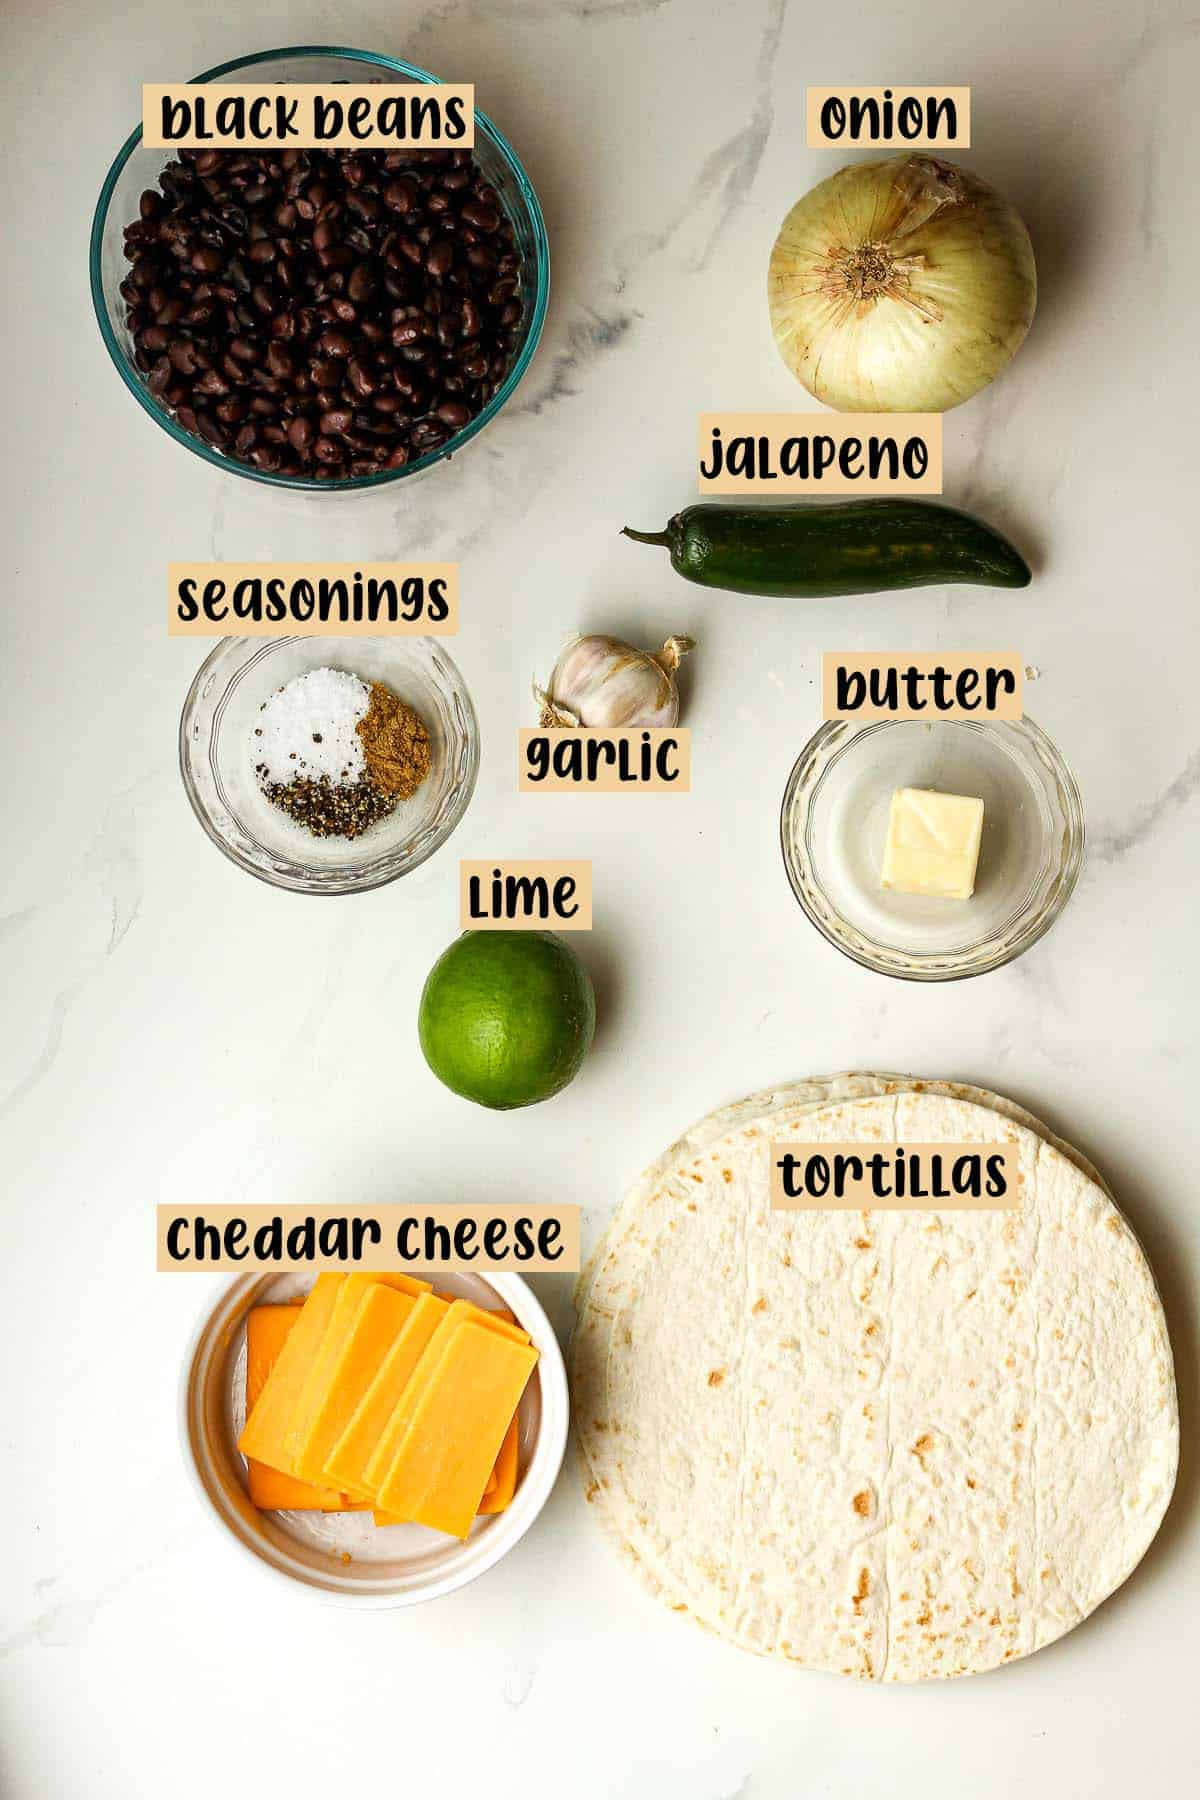 Labeled ingredients for black bean tacos.